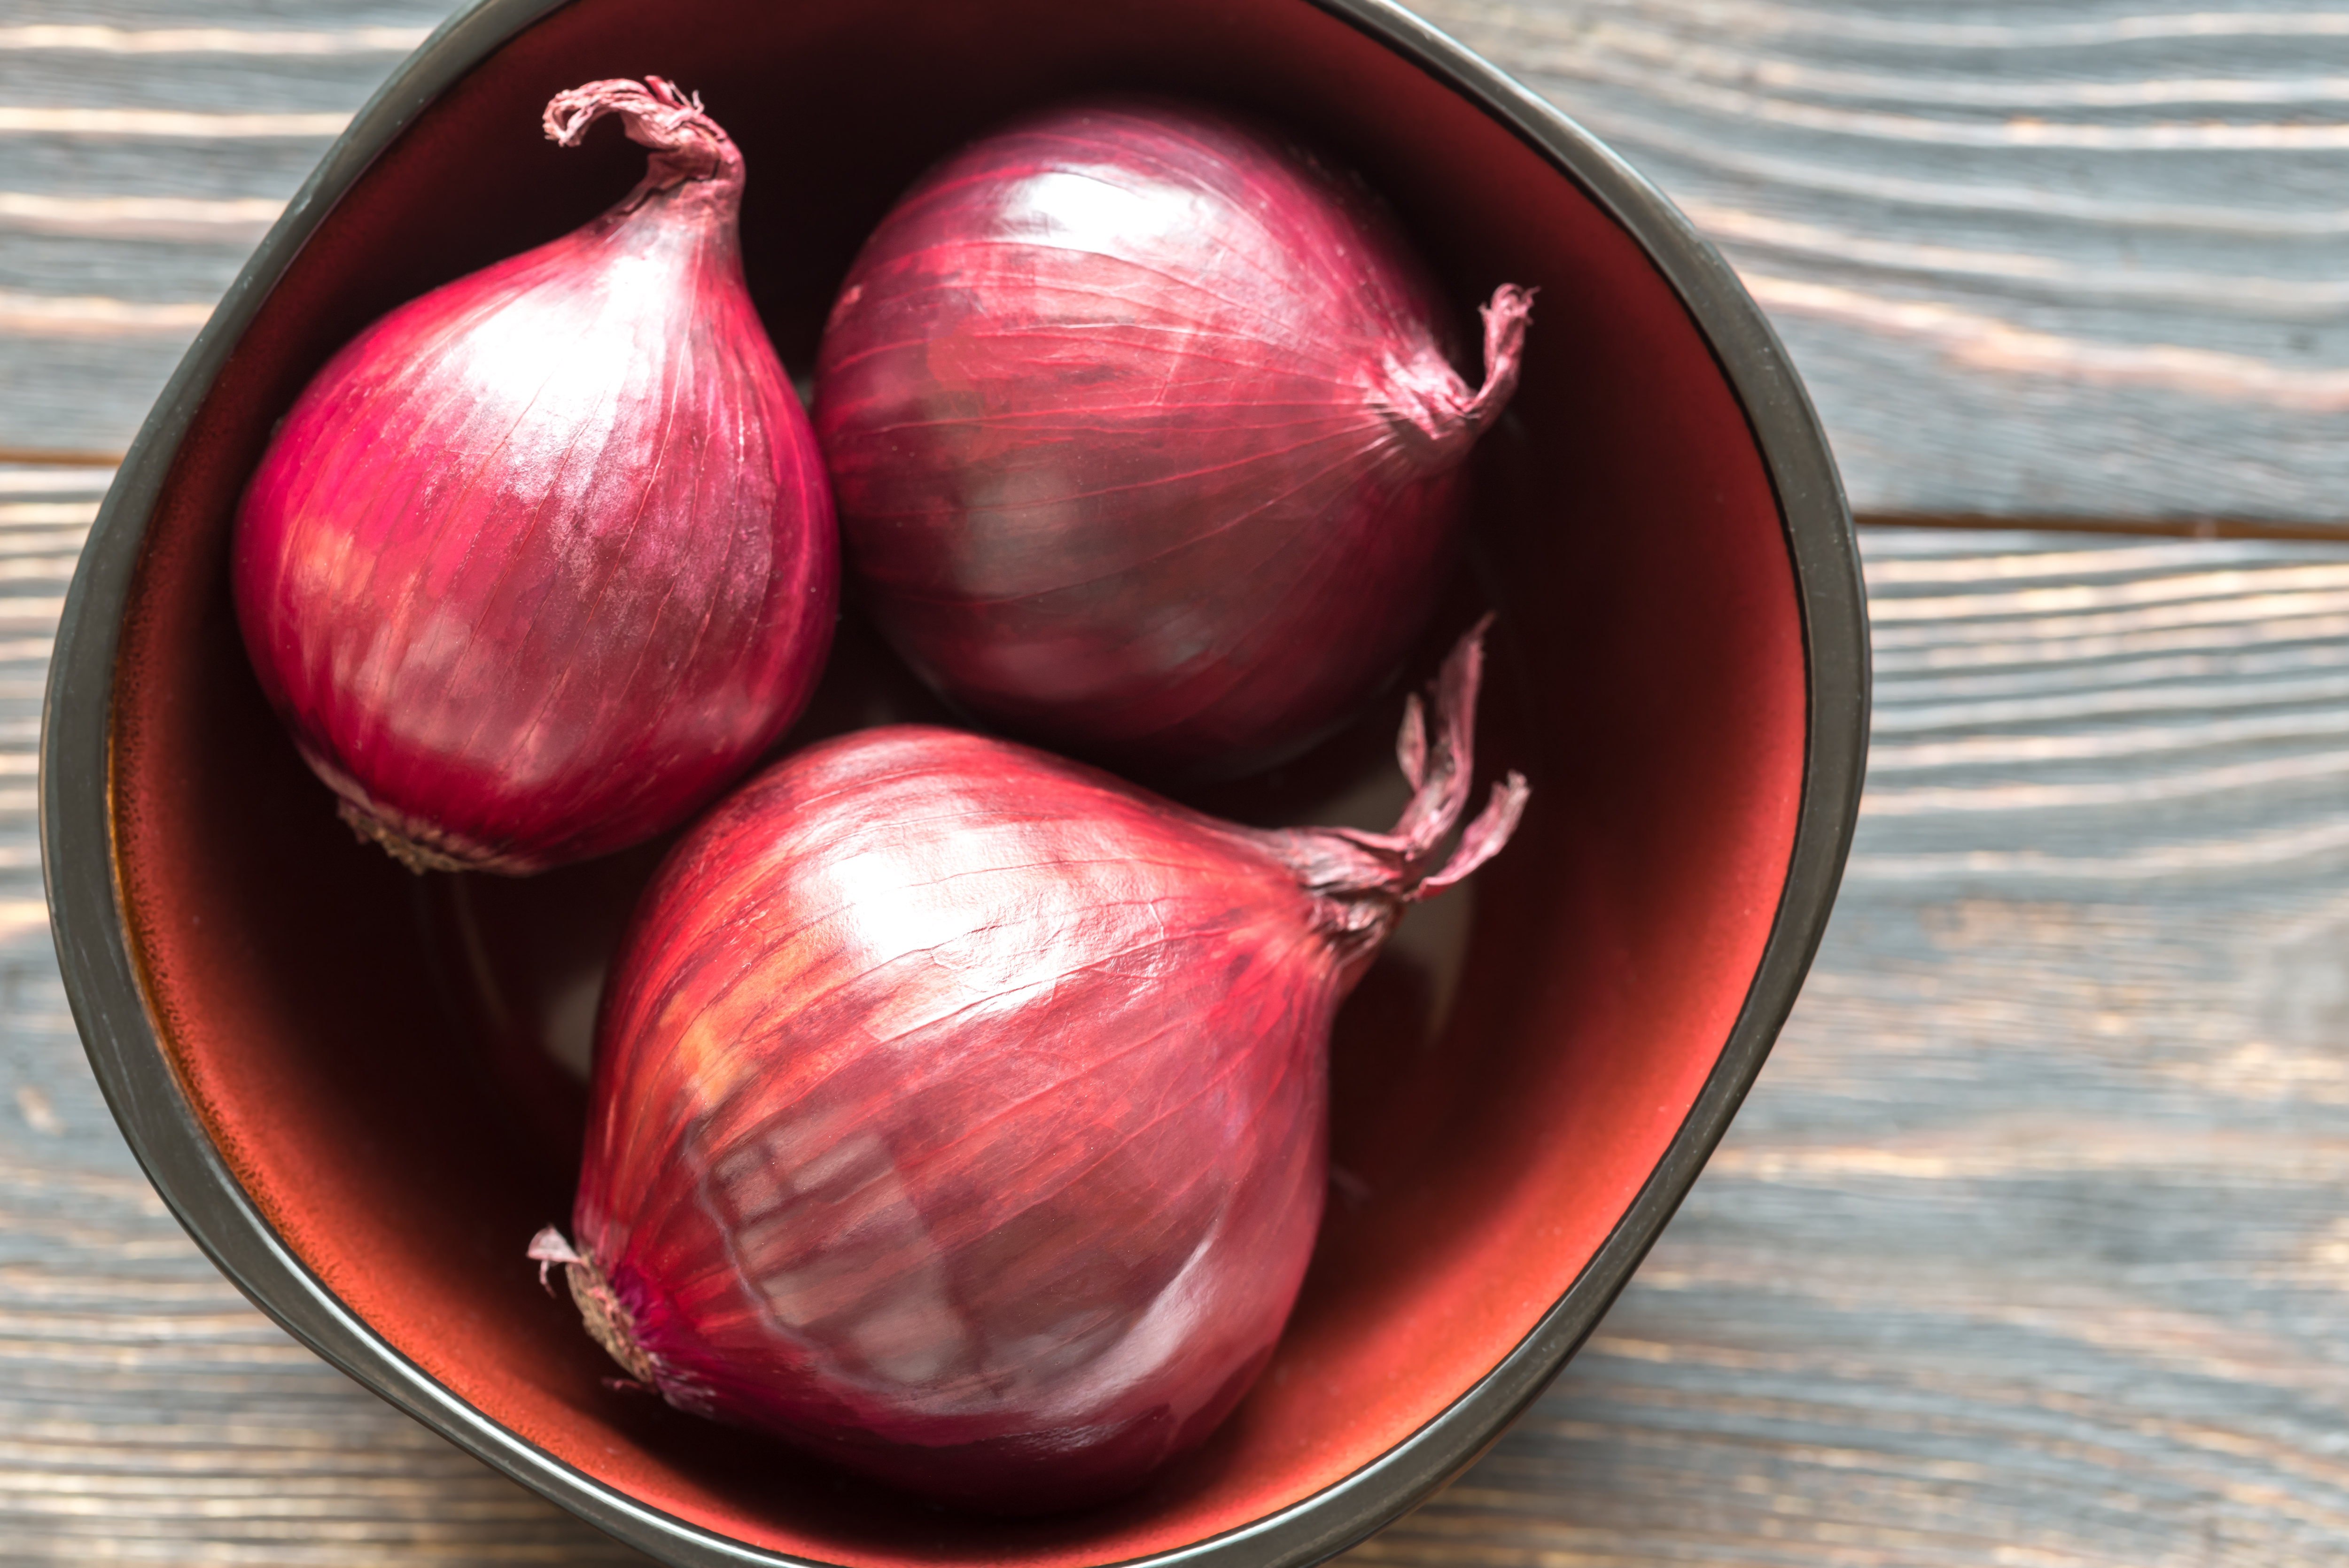 Bowl of red onions